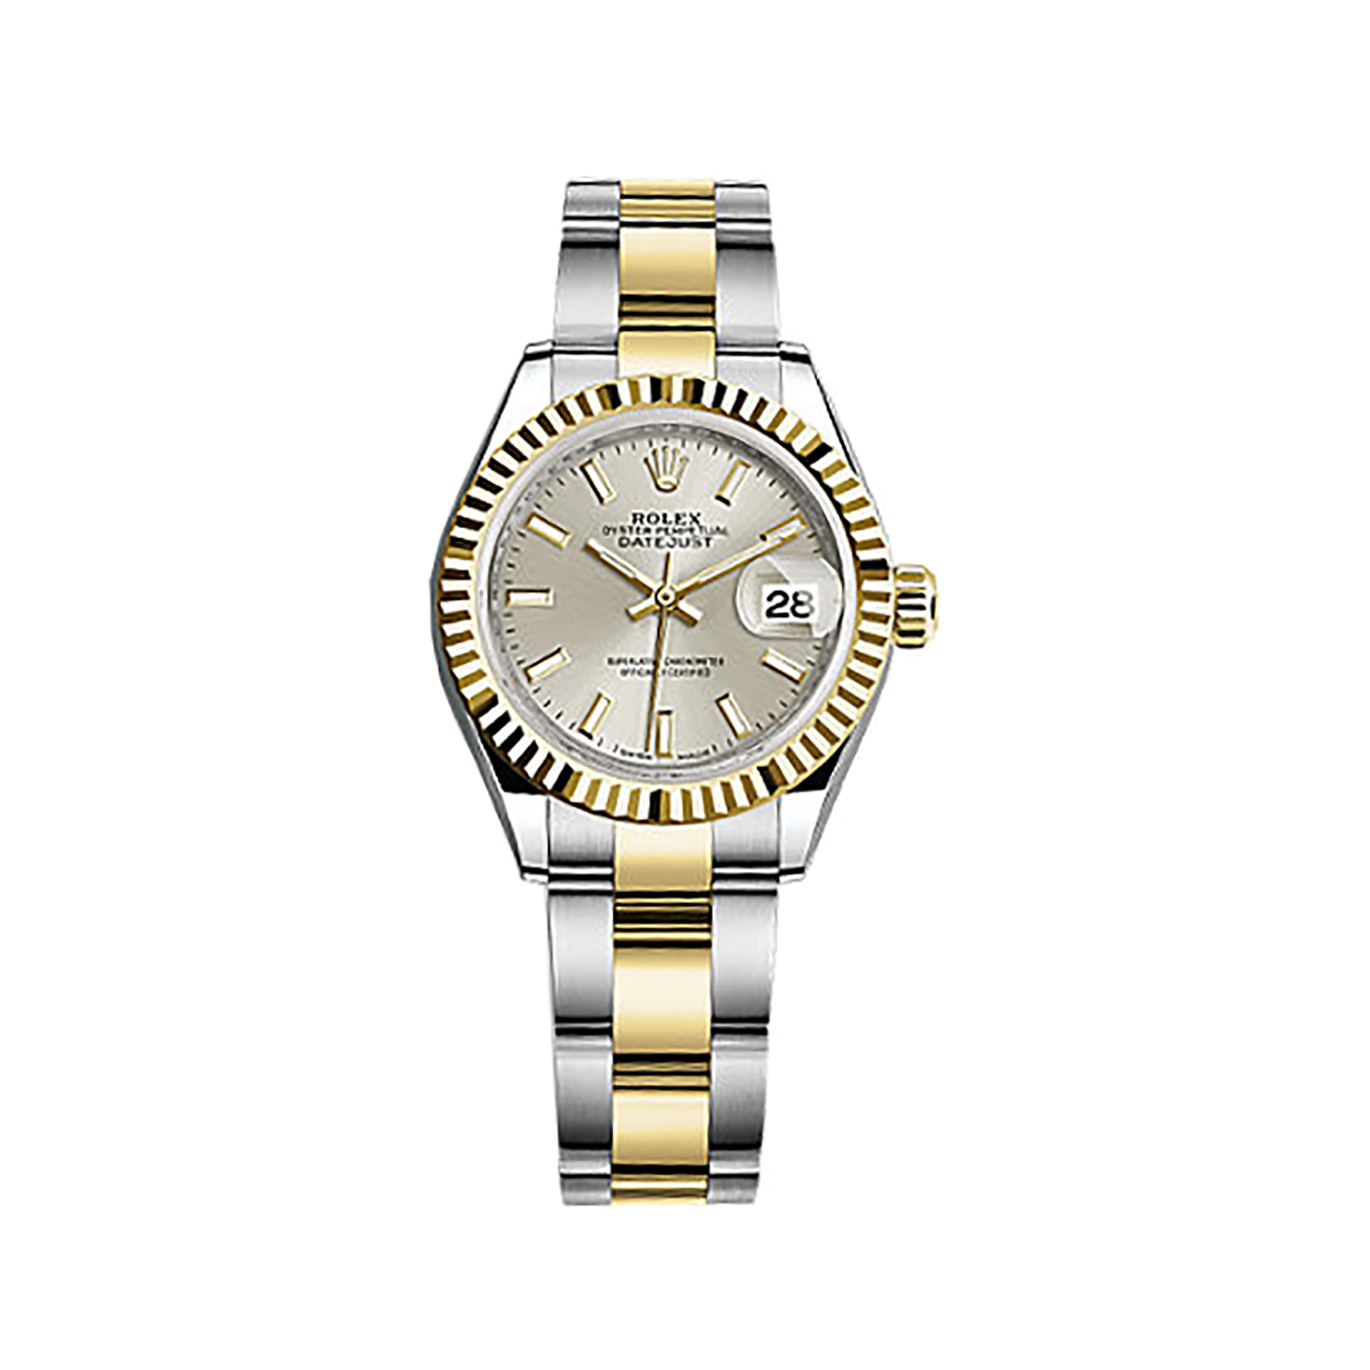 Lady-Datejust 28 279173 Gold & Stainless Steel Watch (Silver) - Click Image to Close